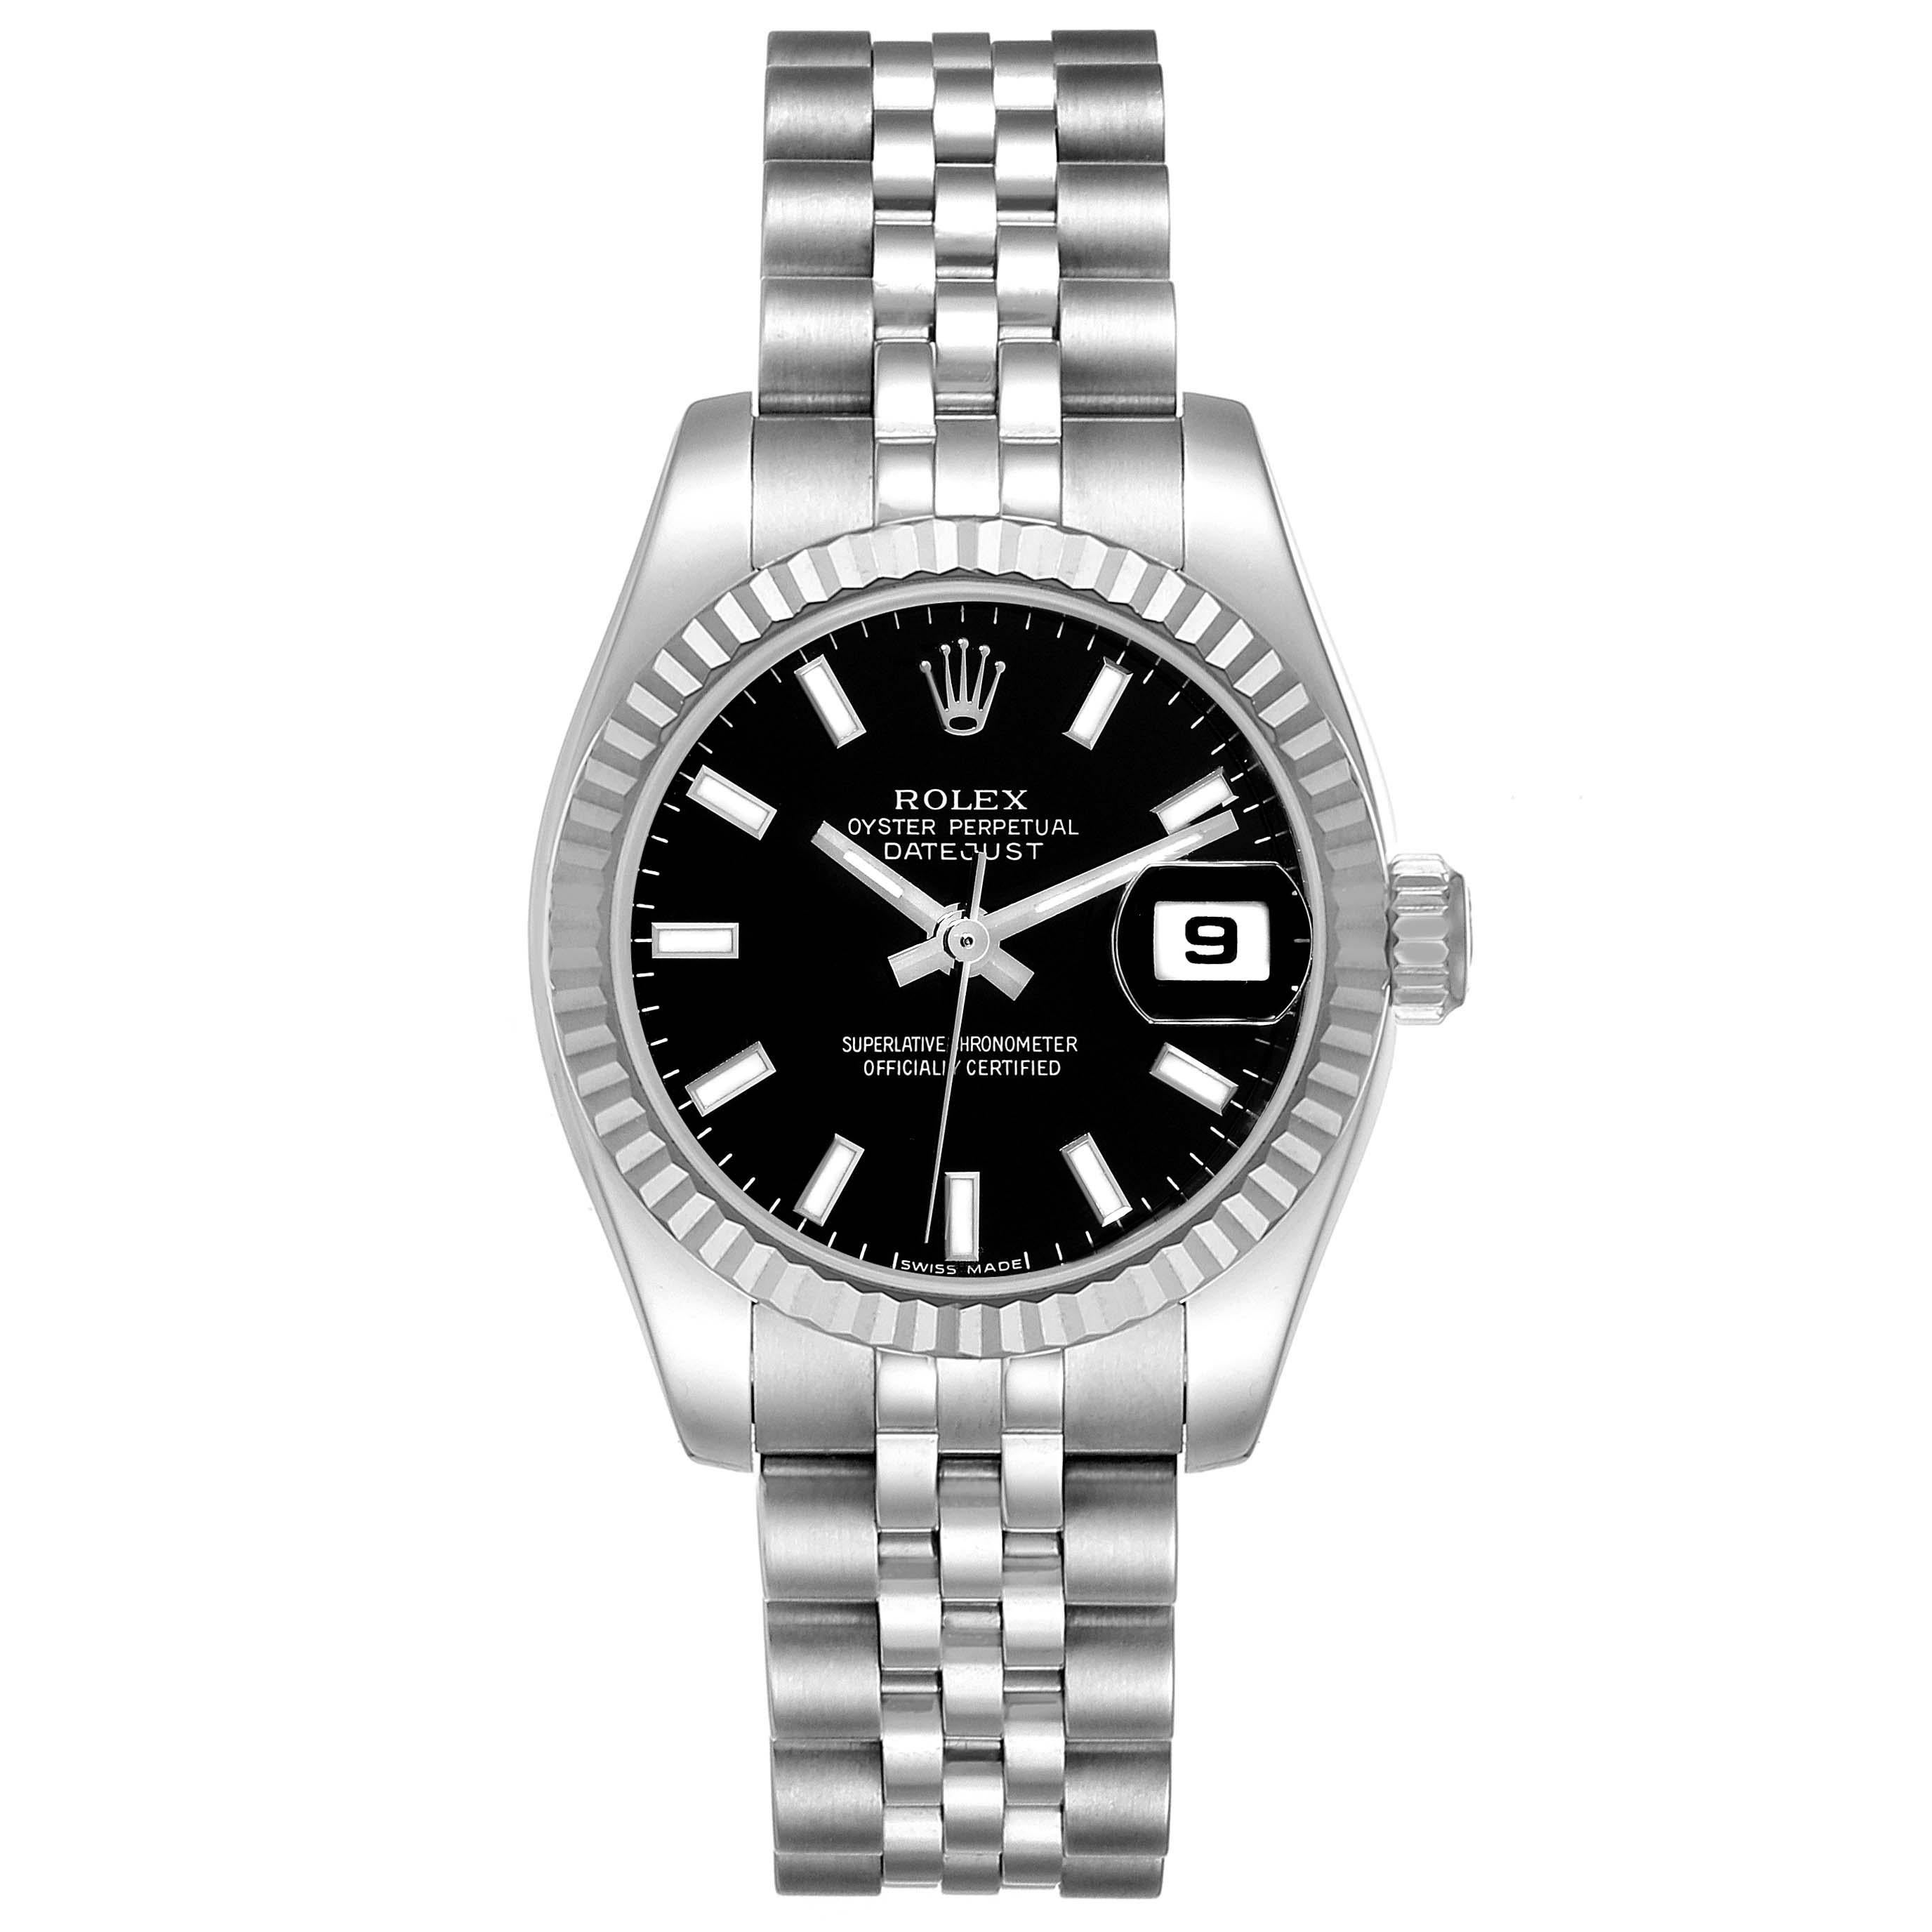 Rolex Datejust Steel White Gold Black Dial Ladies Watch 179174 Box Card For Sale 4